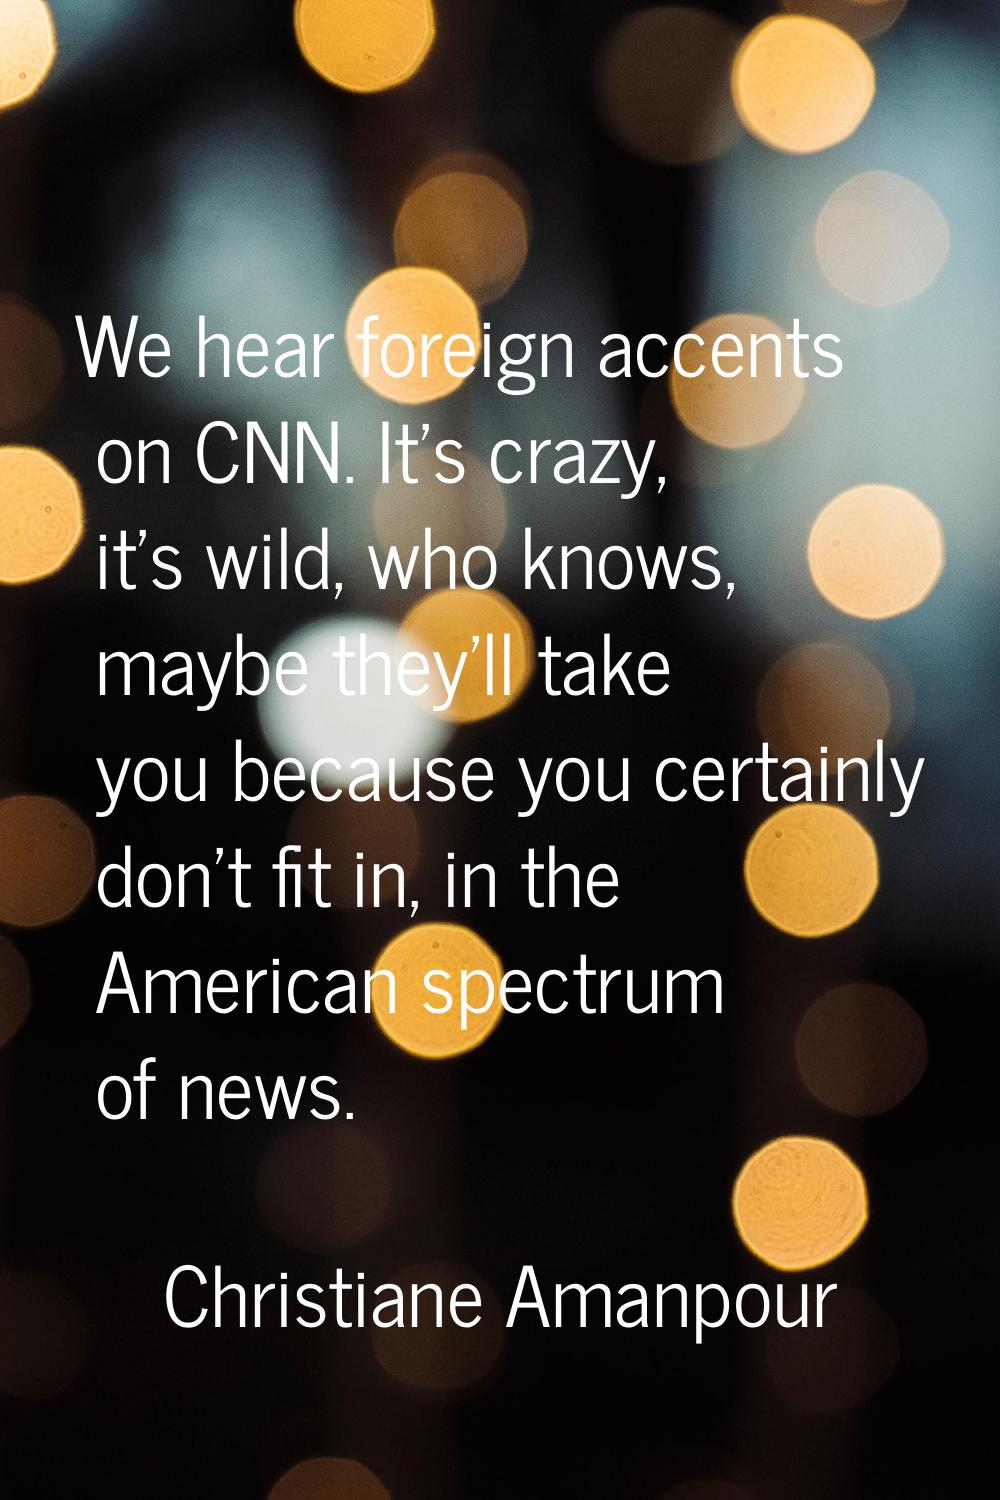 We hear foreign accents on CNN. It's crazy, it's wild, who knows, maybe they'll take you because yo